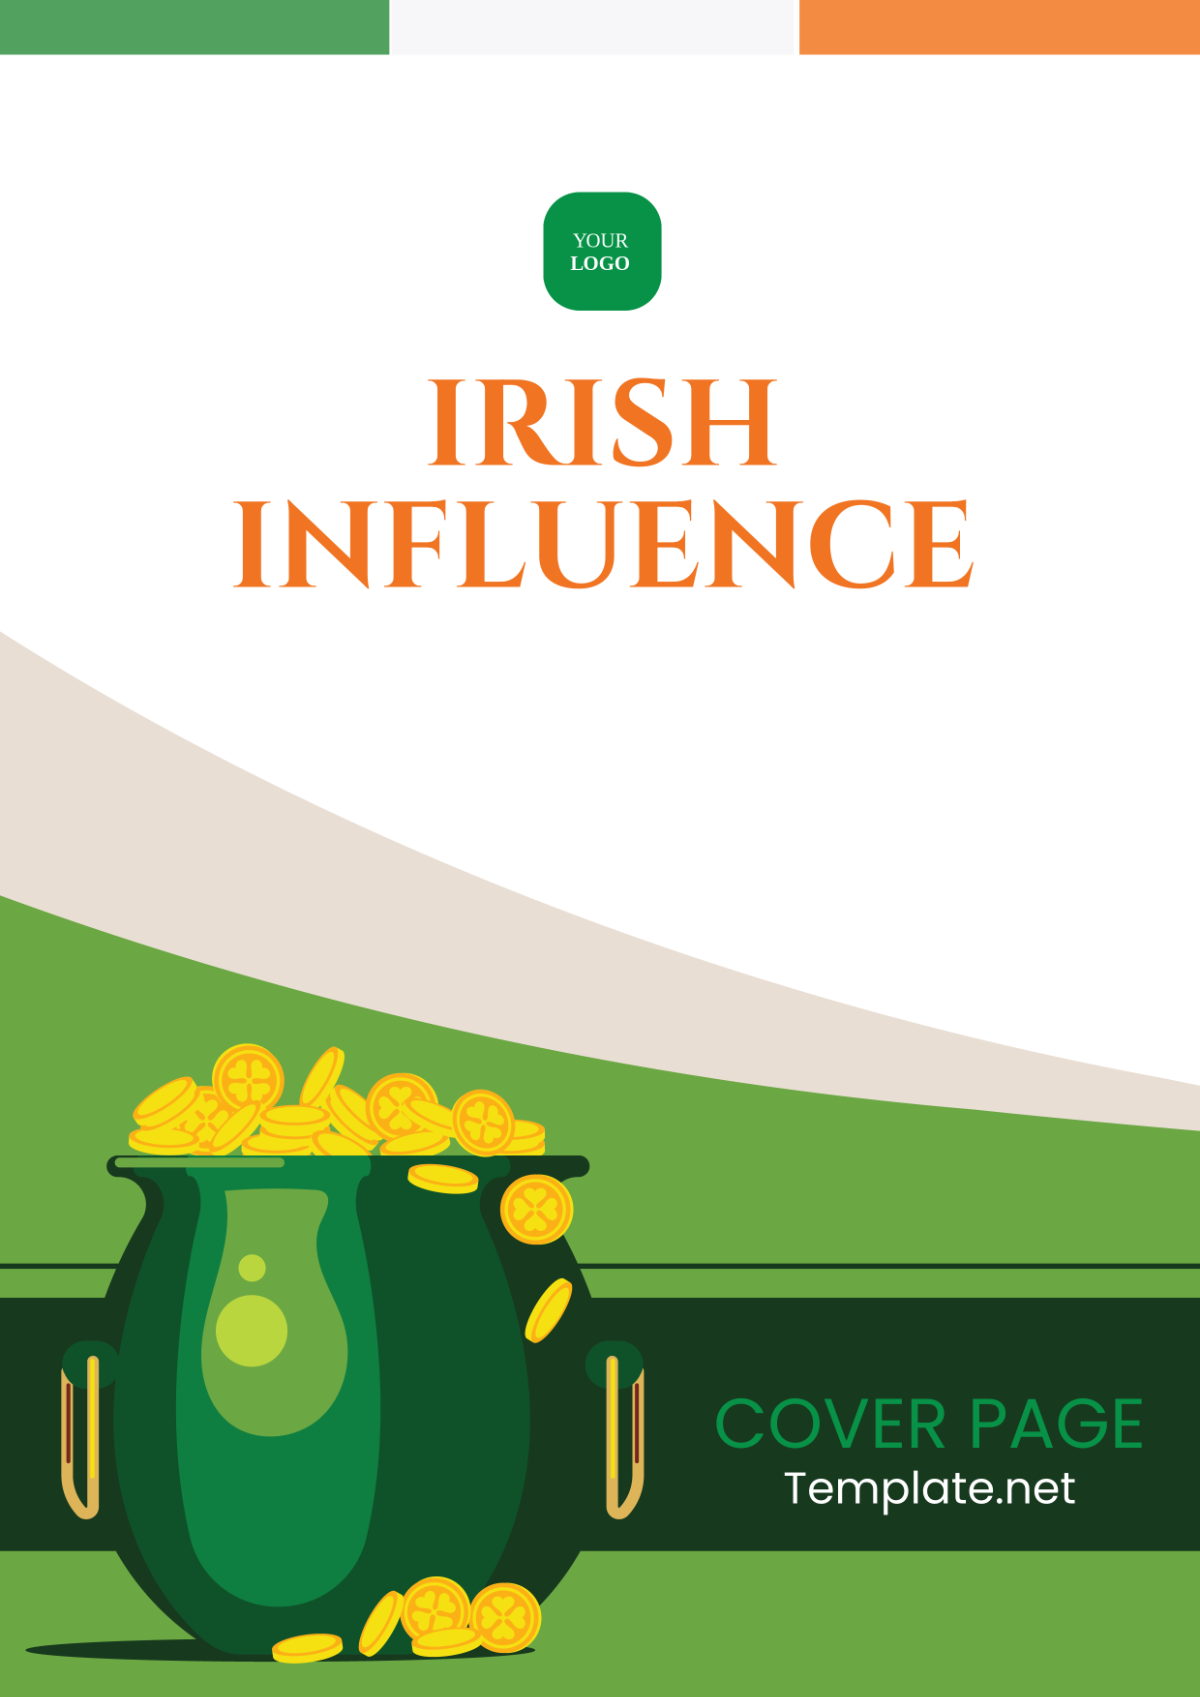 Irish Influence Cover Page Template